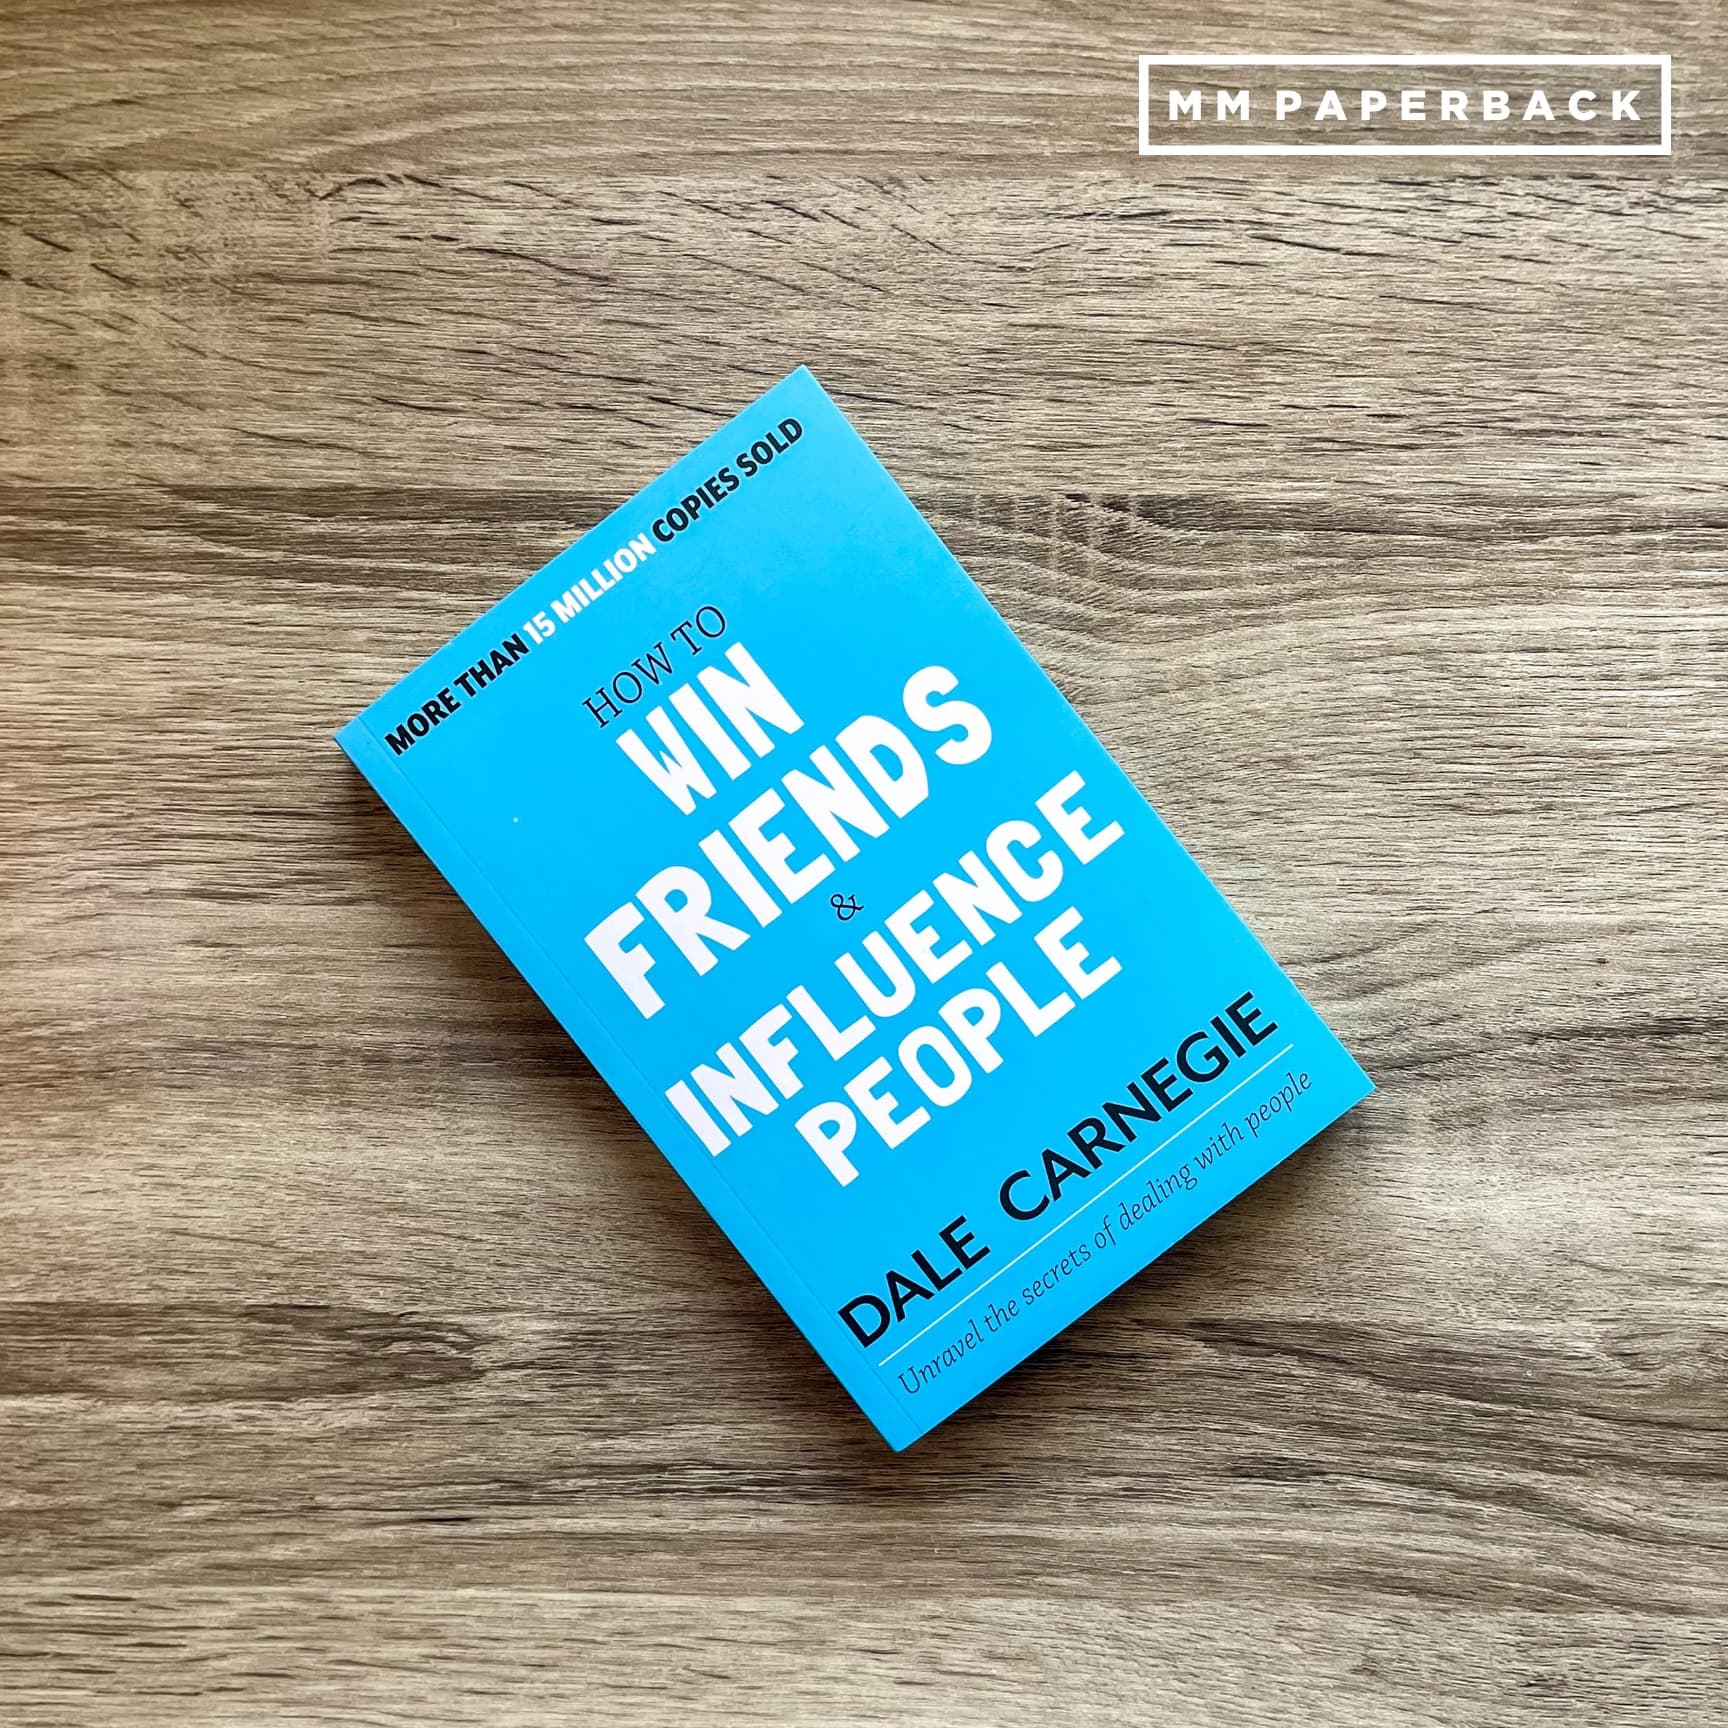 How to Win Friends & Influence People